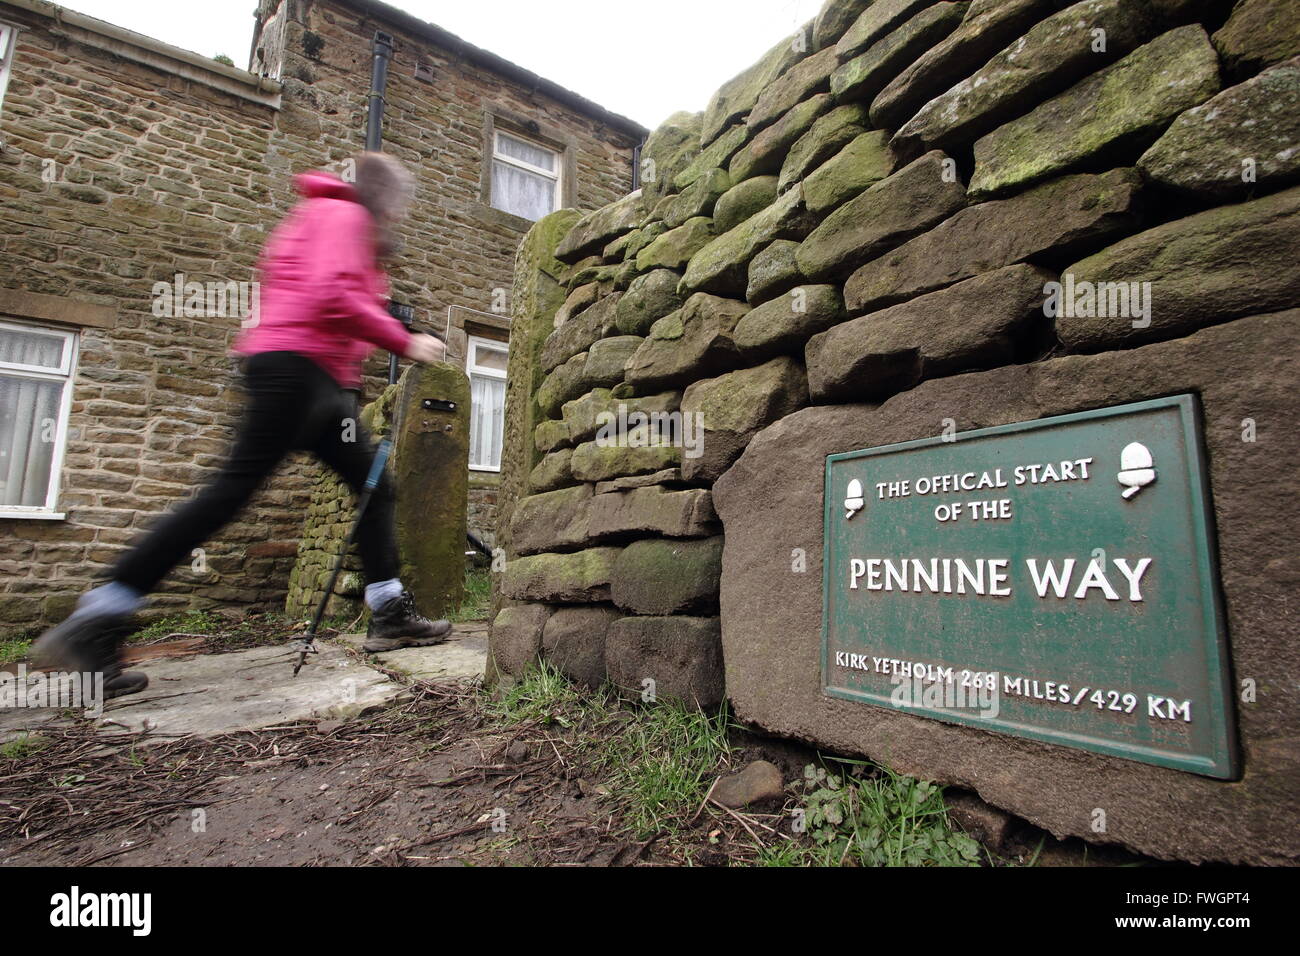 A female walker passes the sign marking the official start of the Pennine Way in Edale village, Peak District National Park, UK Stock Photo